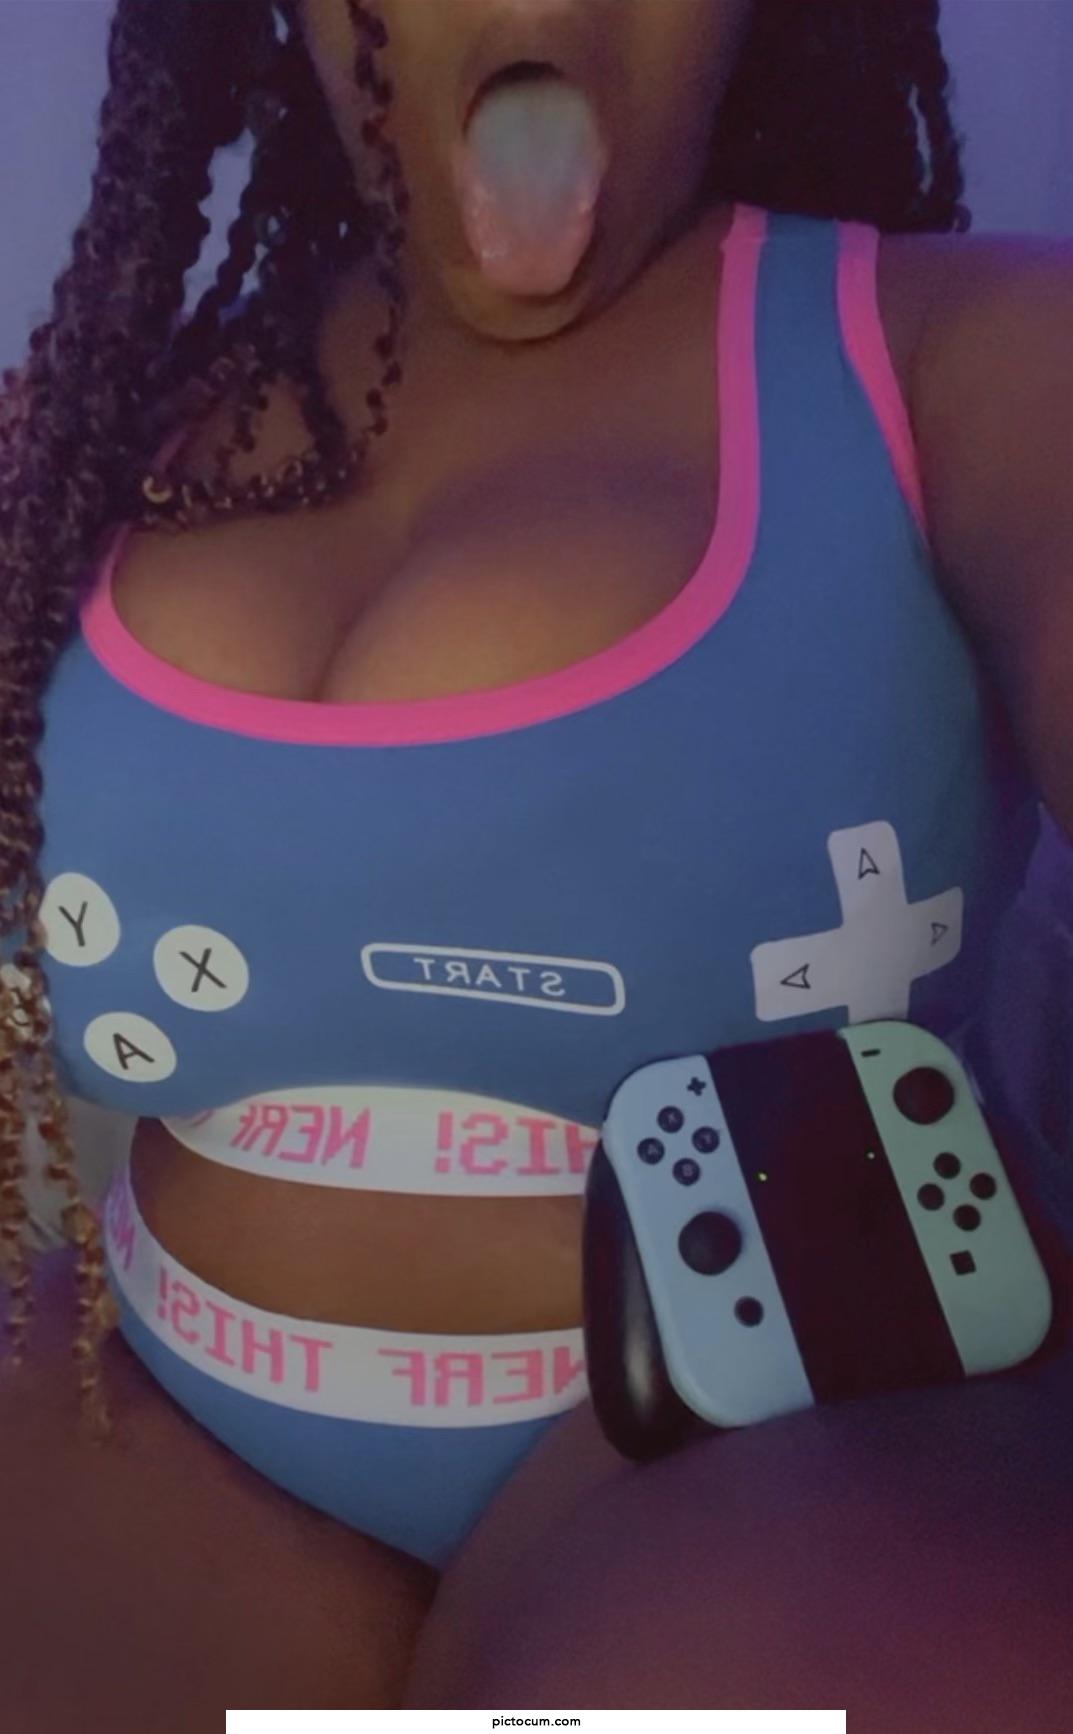 I’m a switch and PlayStation girl